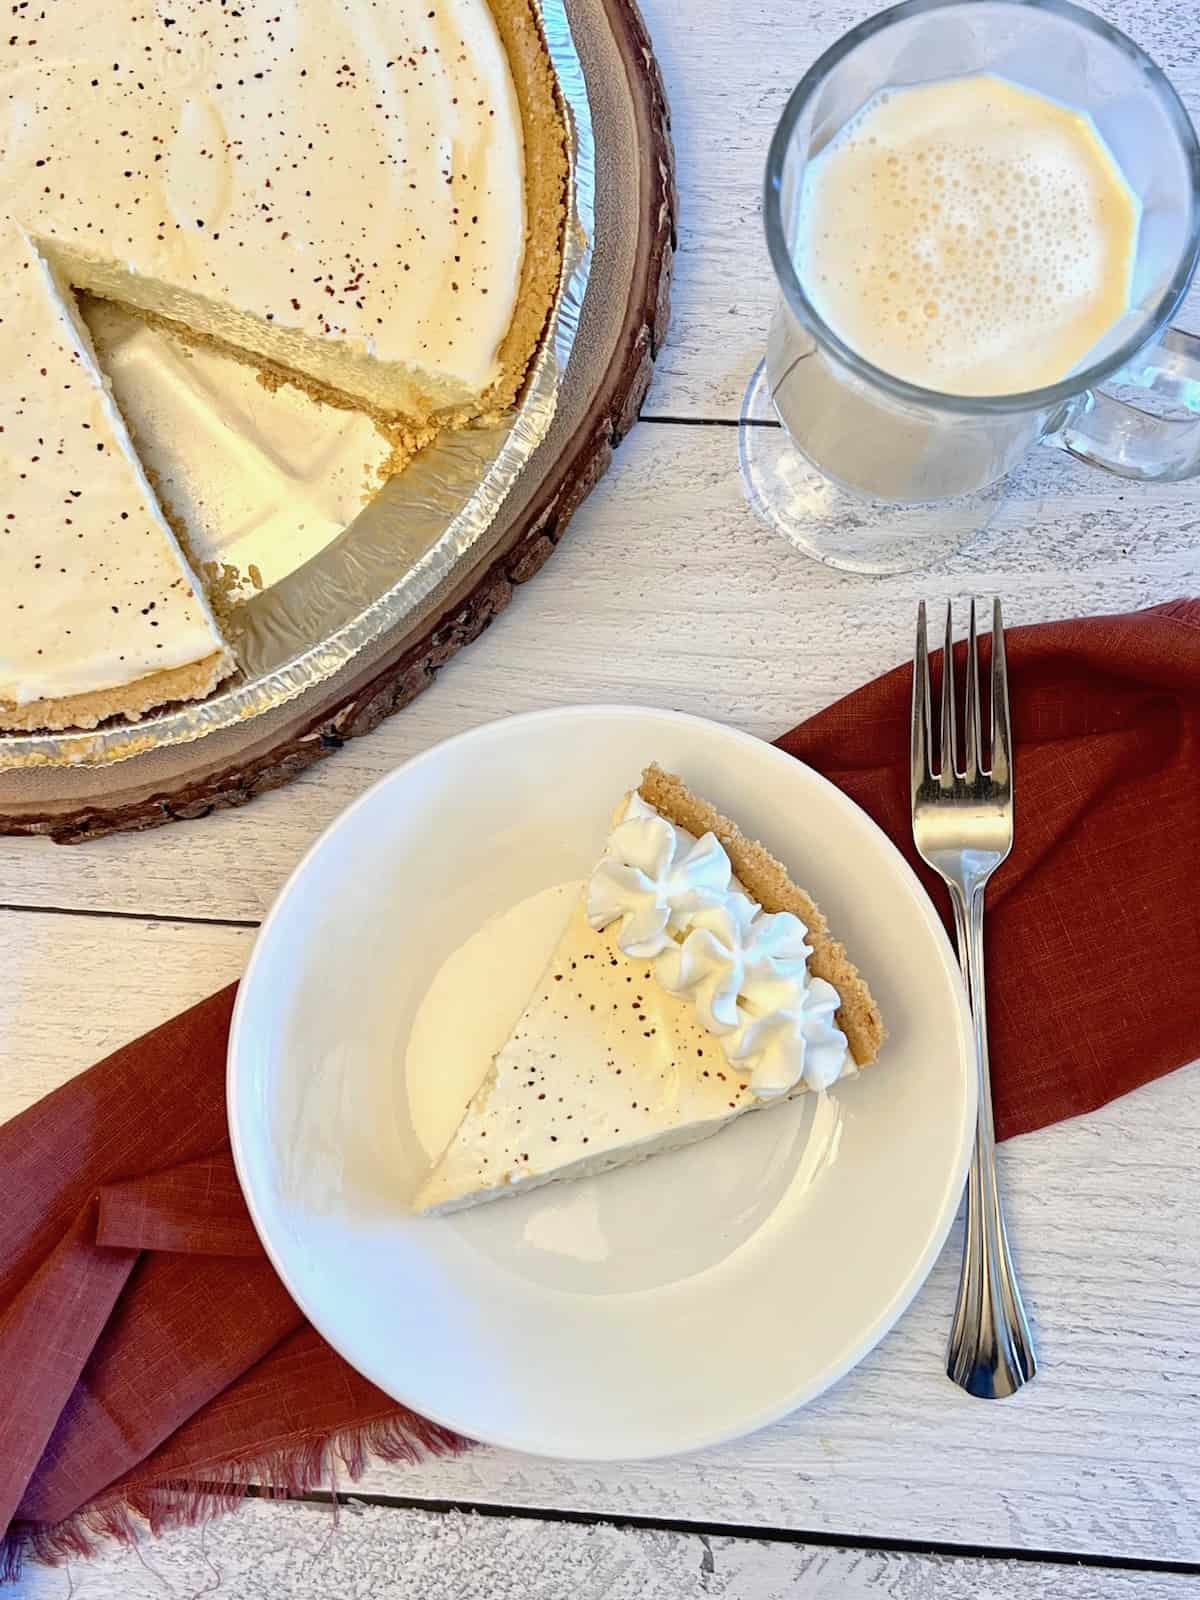 No-Bake Eggnog Pie Overhead of full eggnog pie with slice cut out and on a plate plus glass of eggnog.